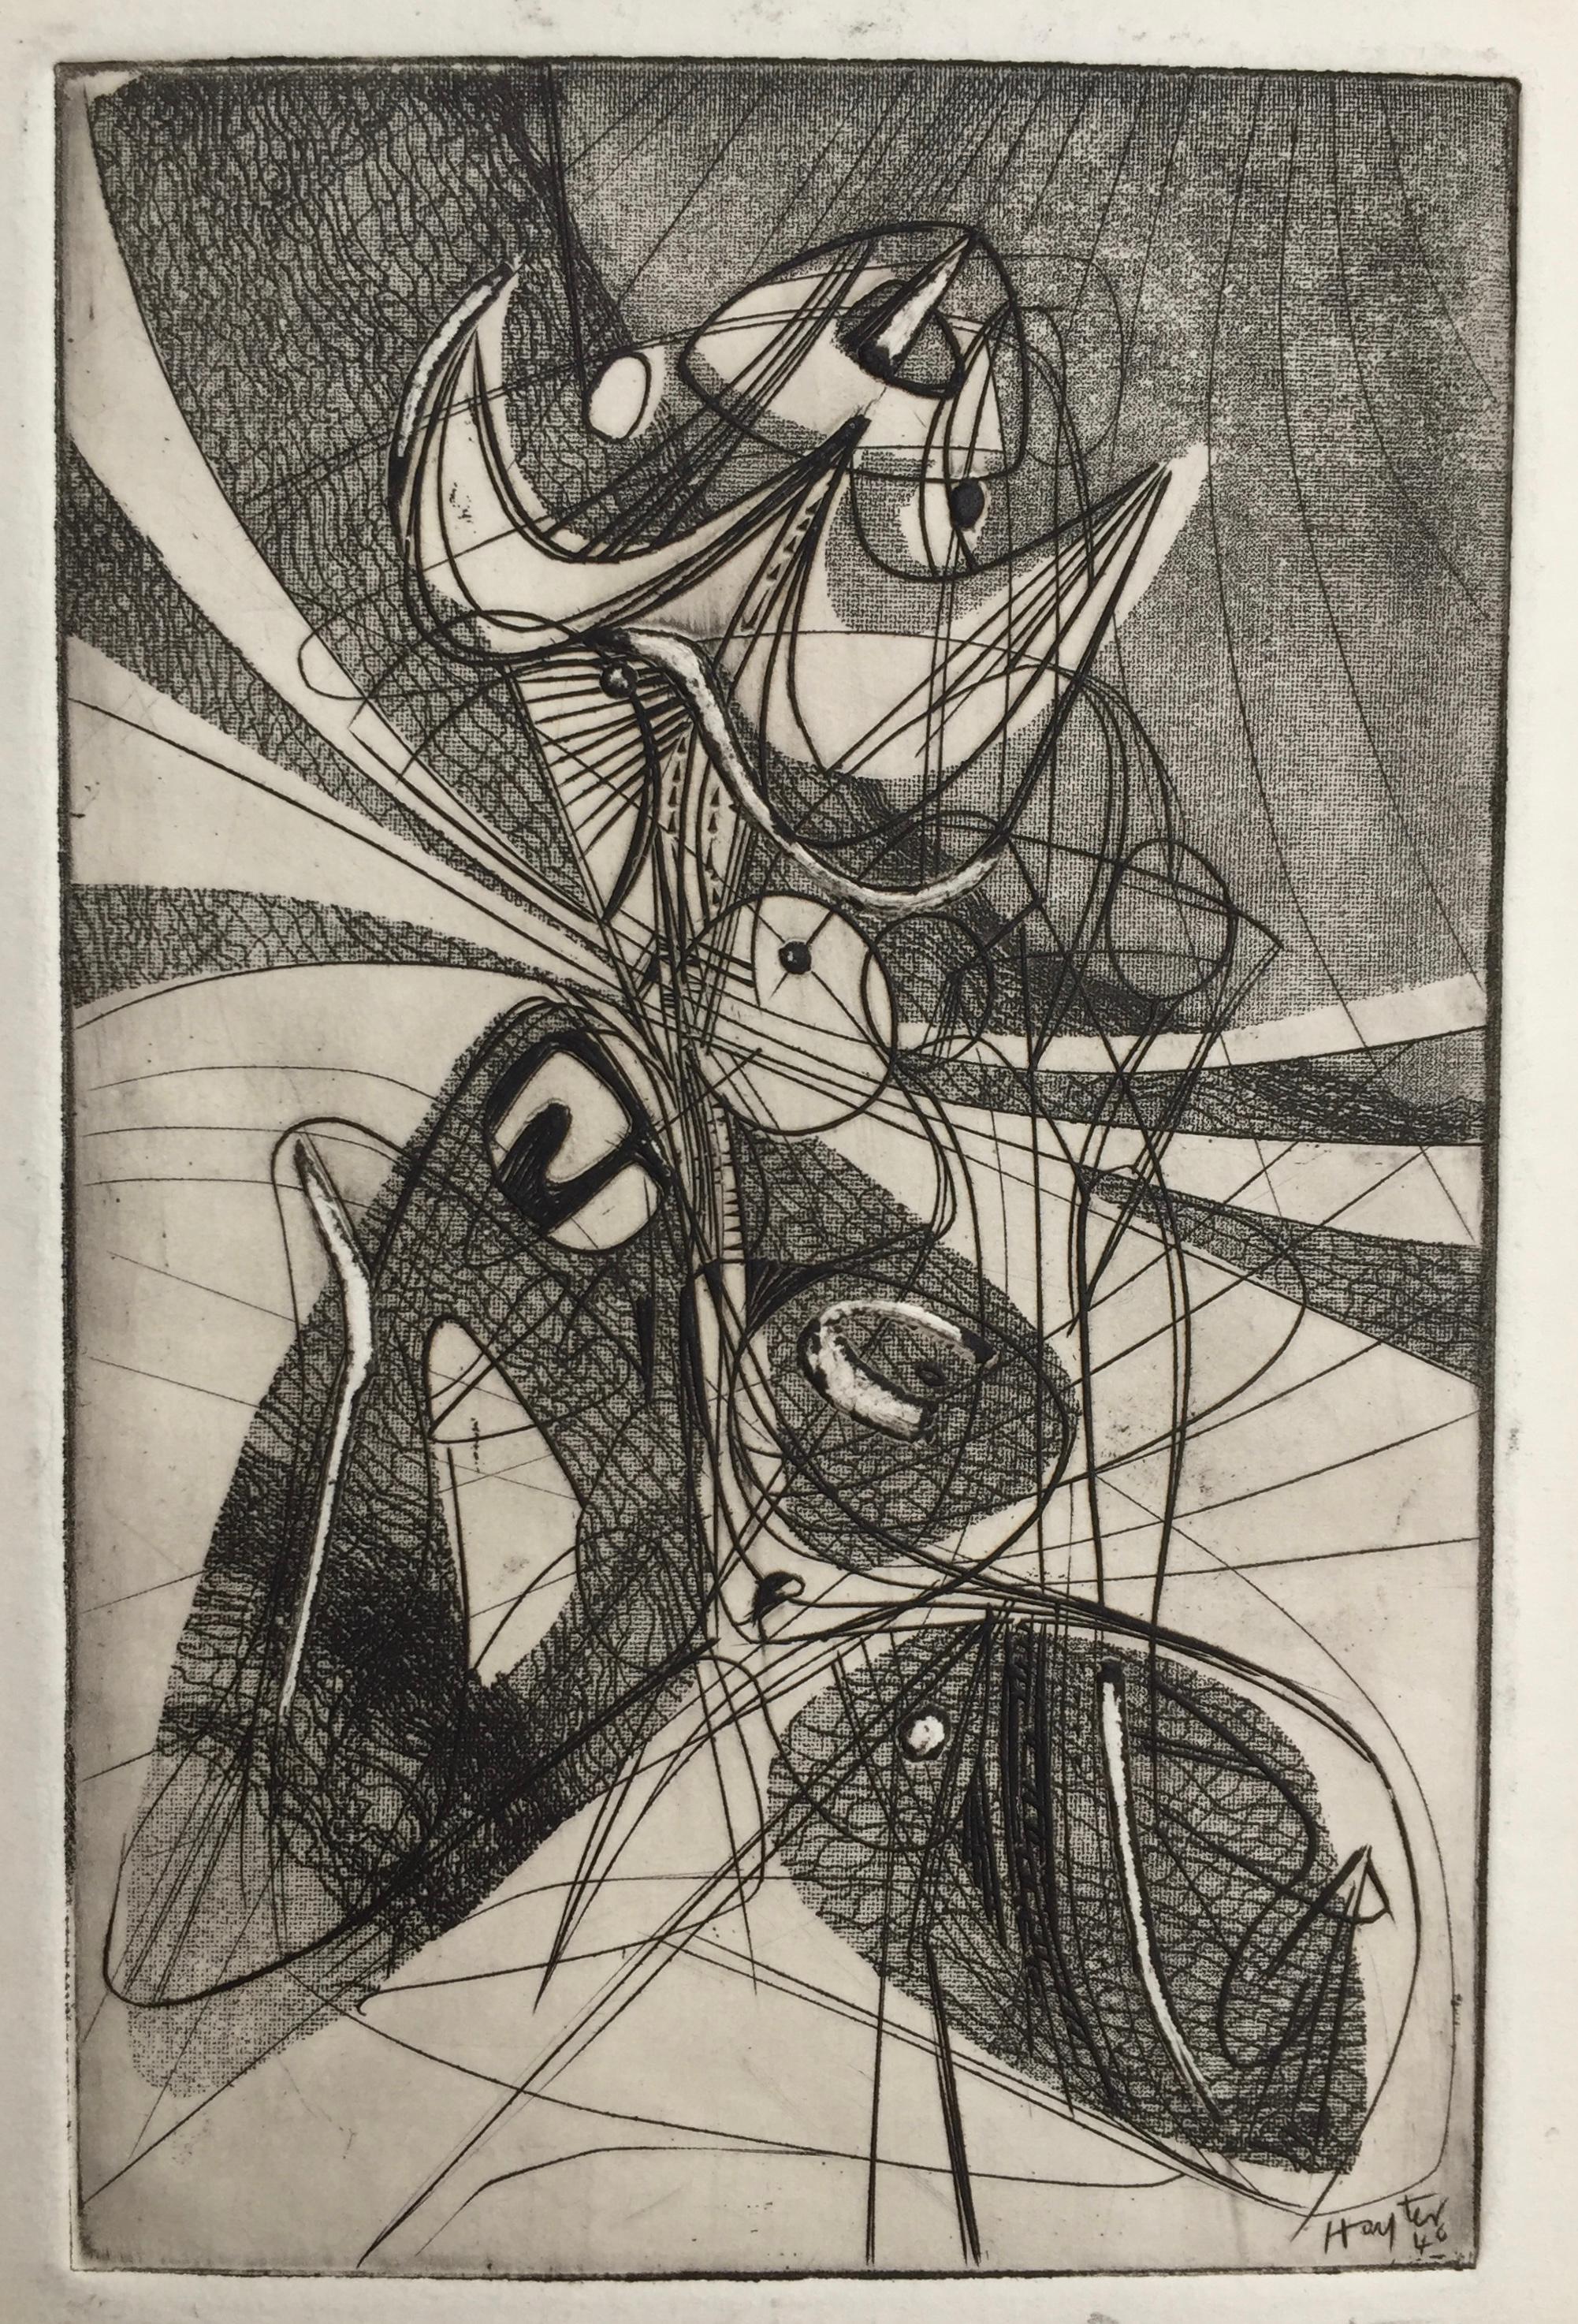 Greeting Card for 1946-7 - Print by Stanley William Hayter